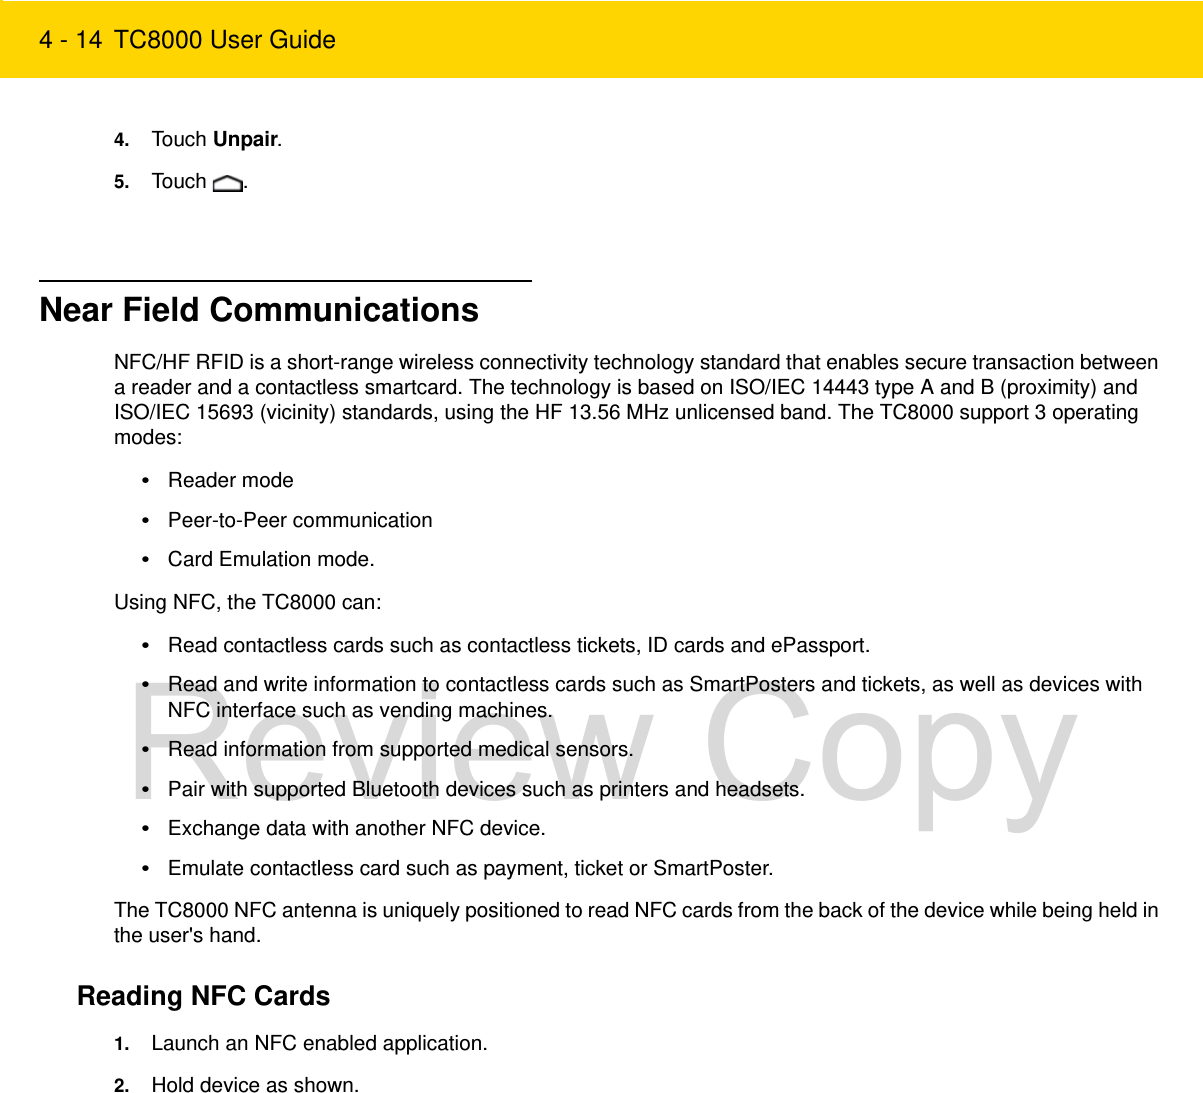 4 - 14 TC8000 User Guide4. Touch Unpair.5. Touch .Near Field CommunicationsNFC/HF RFID is a short-range wireless connectivity technology standard that enables secure transaction between a reader and a contactless smartcard. The technology is based on ISO/IEC 14443 type A and B (proximity) and ISO/IEC 15693 (vicinity) standards, using the HF 13.56 MHz unlicensed band. The TC8000 support 3 operating modes:•Reader mode•Peer-to-Peer communication•Card Emulation mode.Using NFC, the TC8000 can:•Read contactless cards such as contactless tickets, ID cards and ePassport.•Read and write information to contactless cards such as SmartPosters and tickets, as well as devices with NFC interface such as vending machines.•Read information from supported medical sensors.•Pair with supported Bluetooth devices such as printers and headsets.•Exchange data with another NFC device.•Emulate contactless card such as payment, ticket or SmartPoster.The TC8000 NFC antenna is uniquely positioned to read NFC cards from the back of the device while being held in the user&apos;s hand.Reading NFC Cards1. Launch an NFC enabled application.2. Hold device as shown.Review Copy